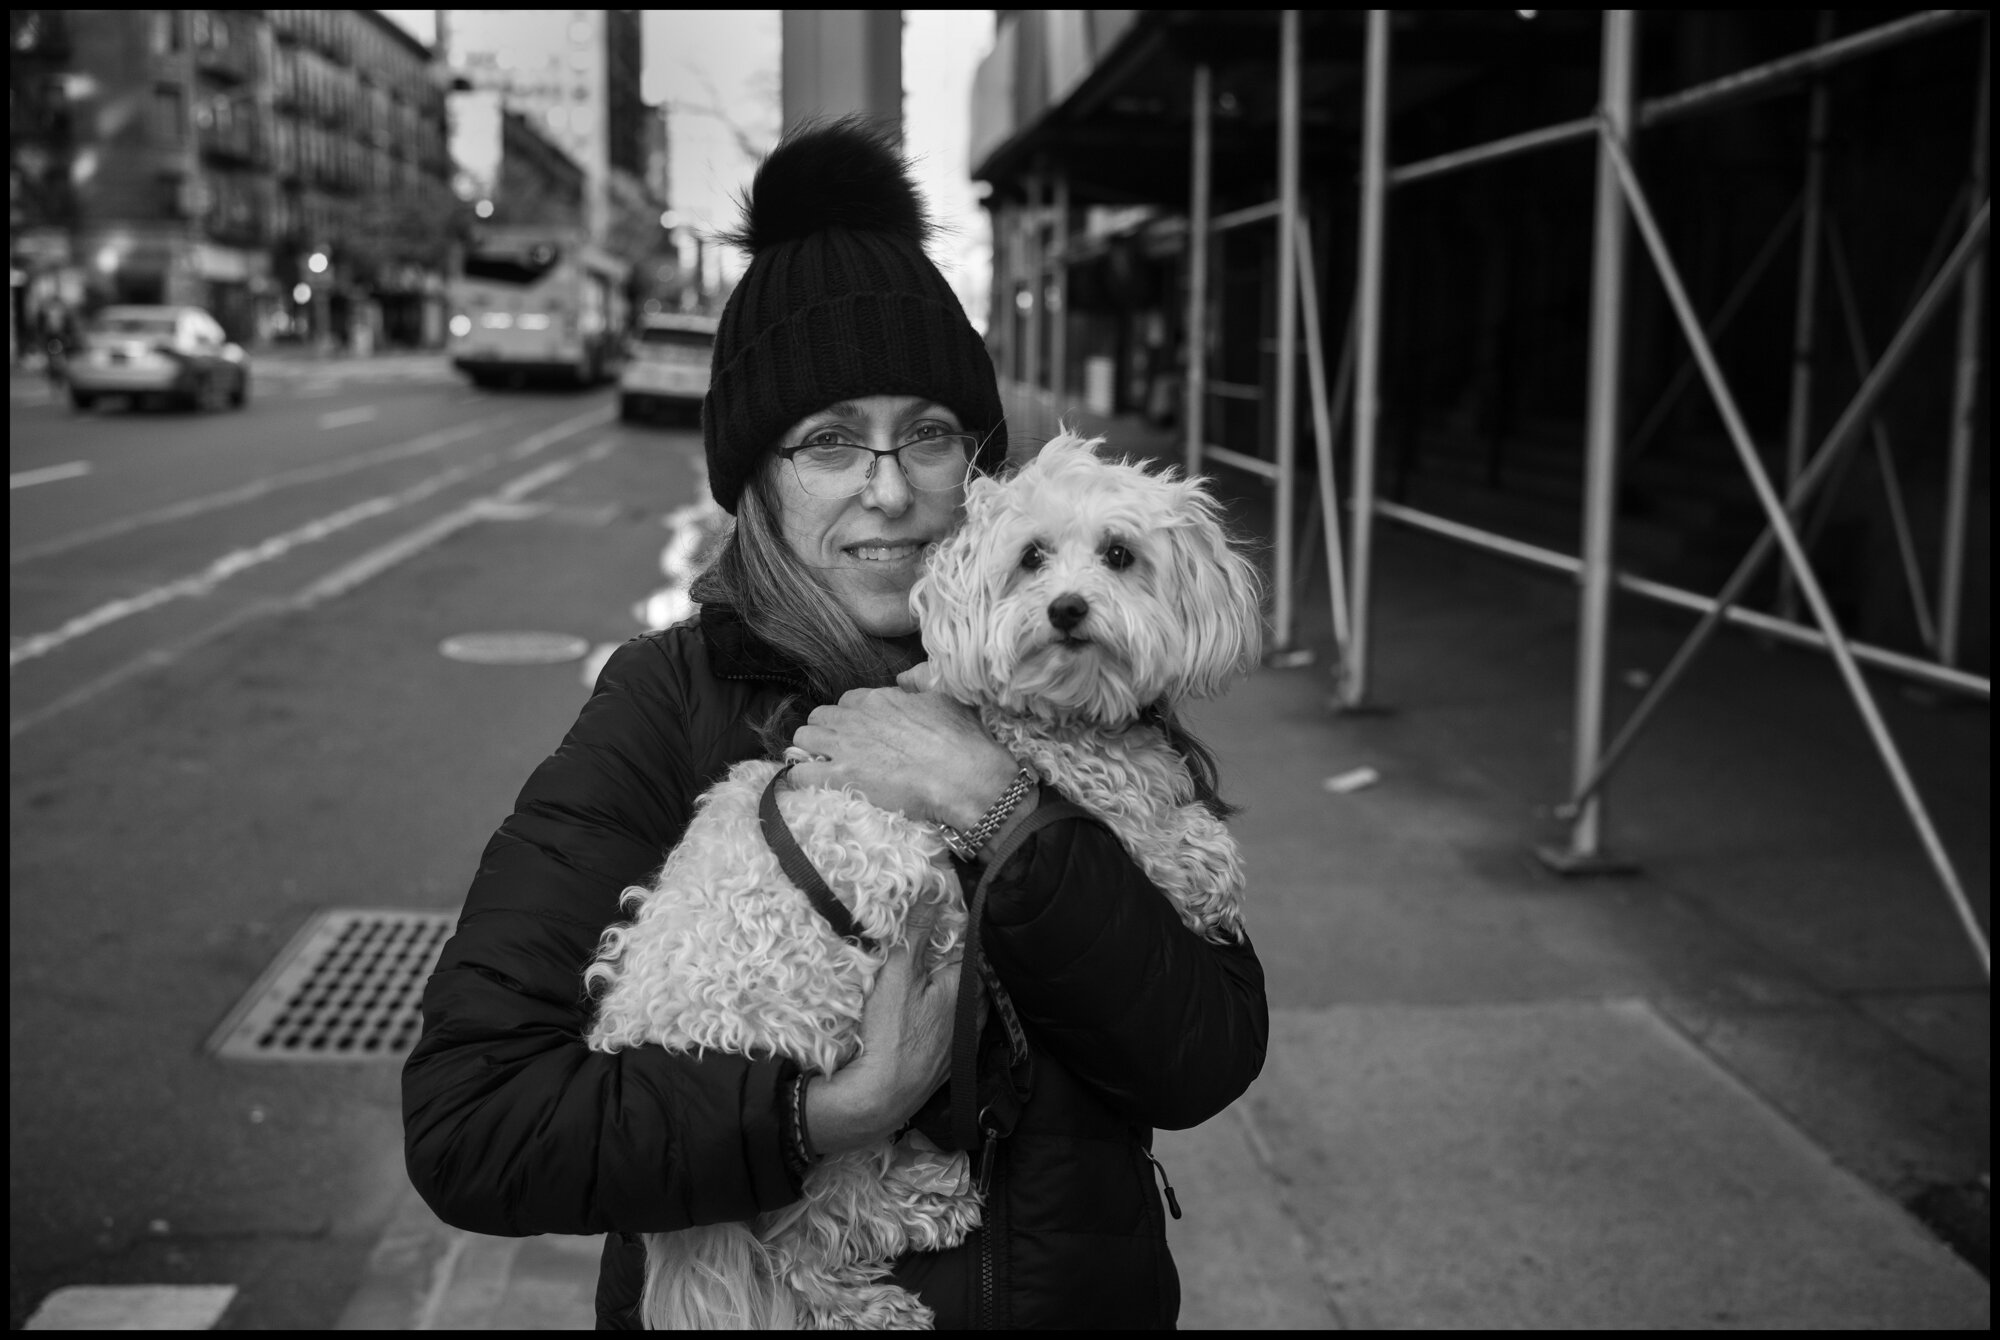  Loren crosses the street with her dog Molly while out for a walk on Amsterdam Avenue on the Upper Westside.   March 24, 2020. © Peter Turnley.&nbsp;  ID# 03-003 